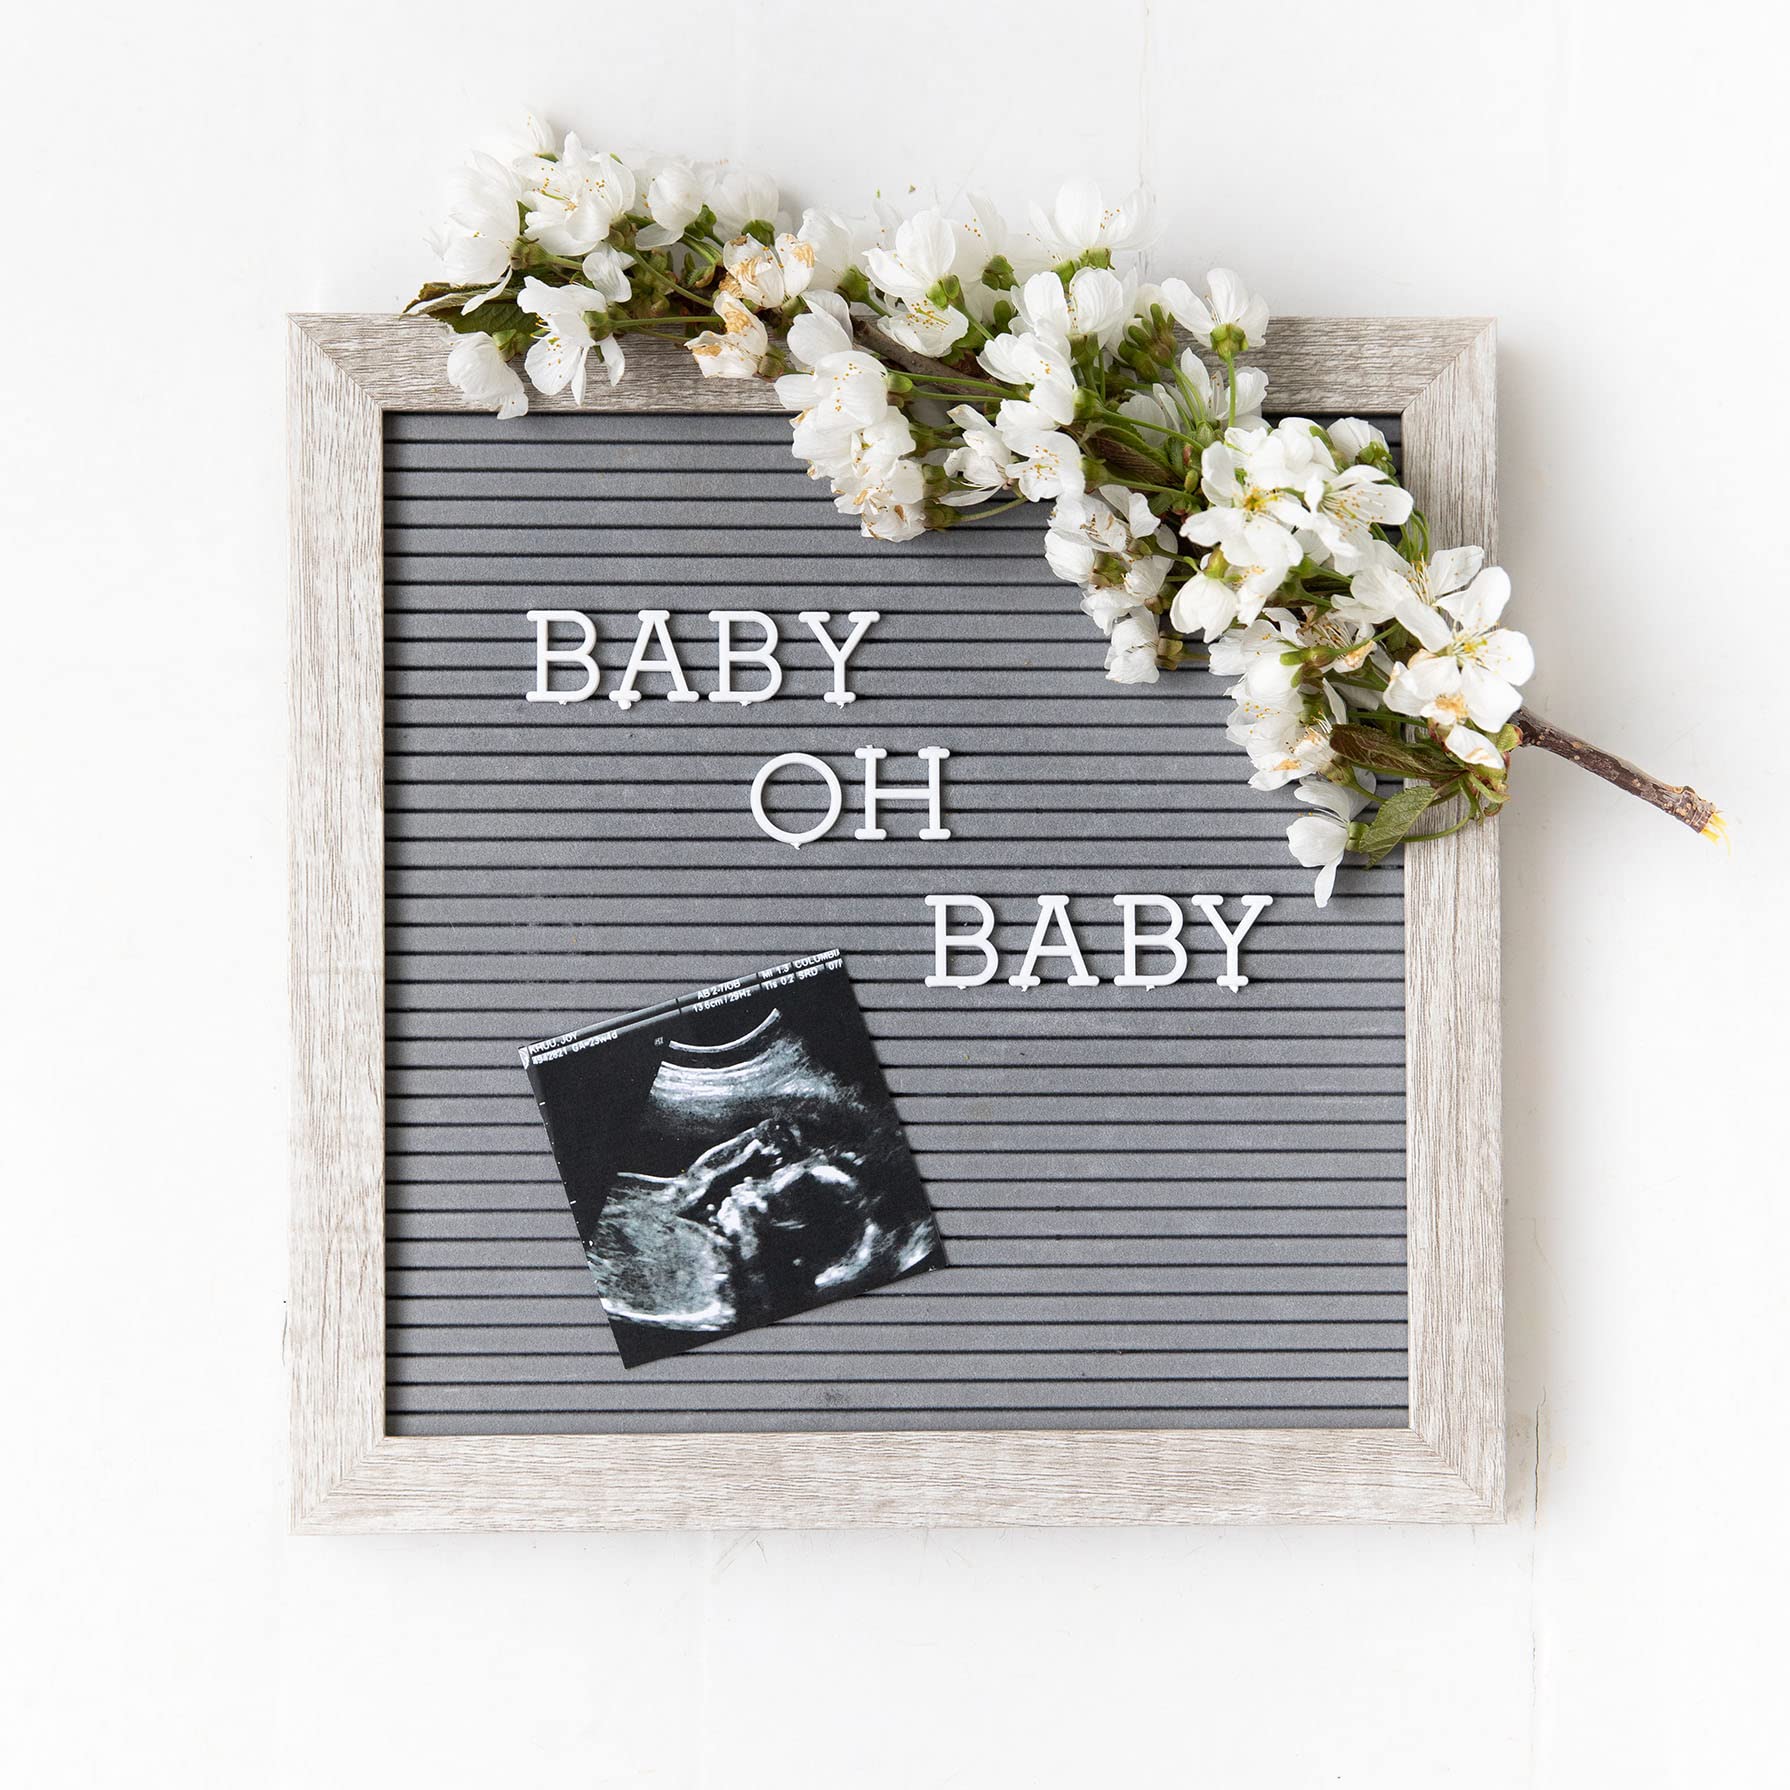 Pearhead 10" x 10" Letterboard, Rustic Nursery, Message Board, Milestone or Baby Announcement Sign, Light Gray